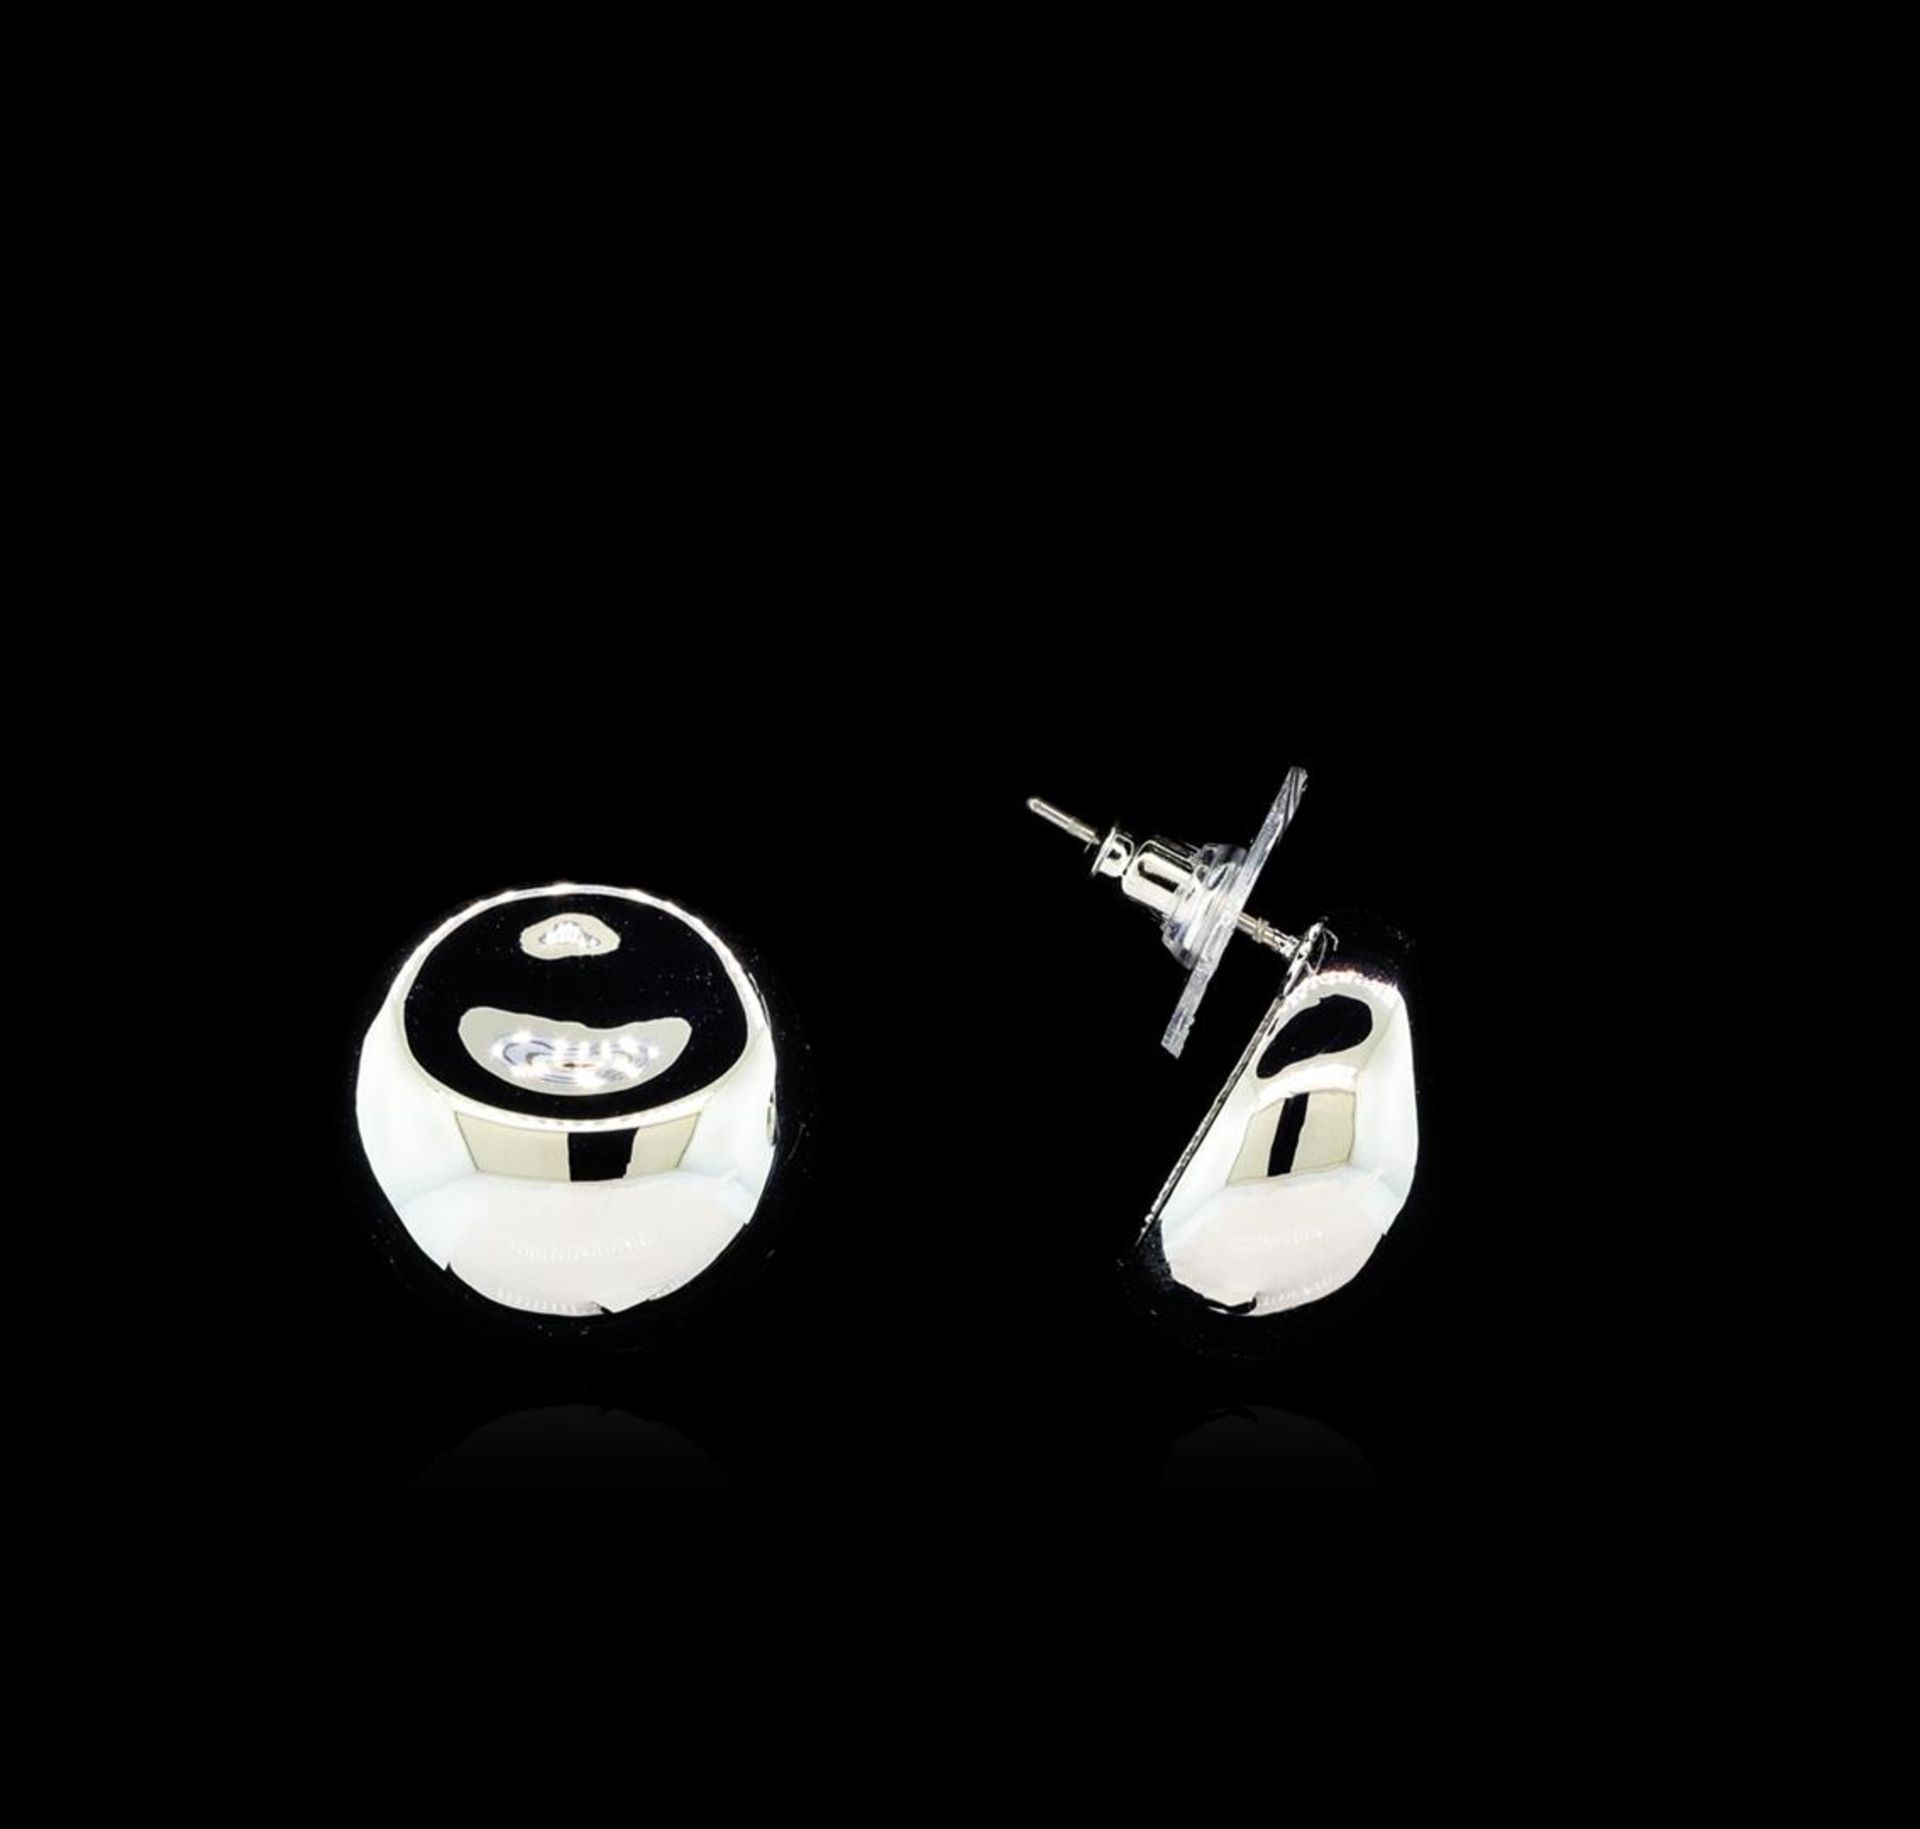 Glossy and Satin Round Post Earrings - Rhodium Plated - Image 2 of 2